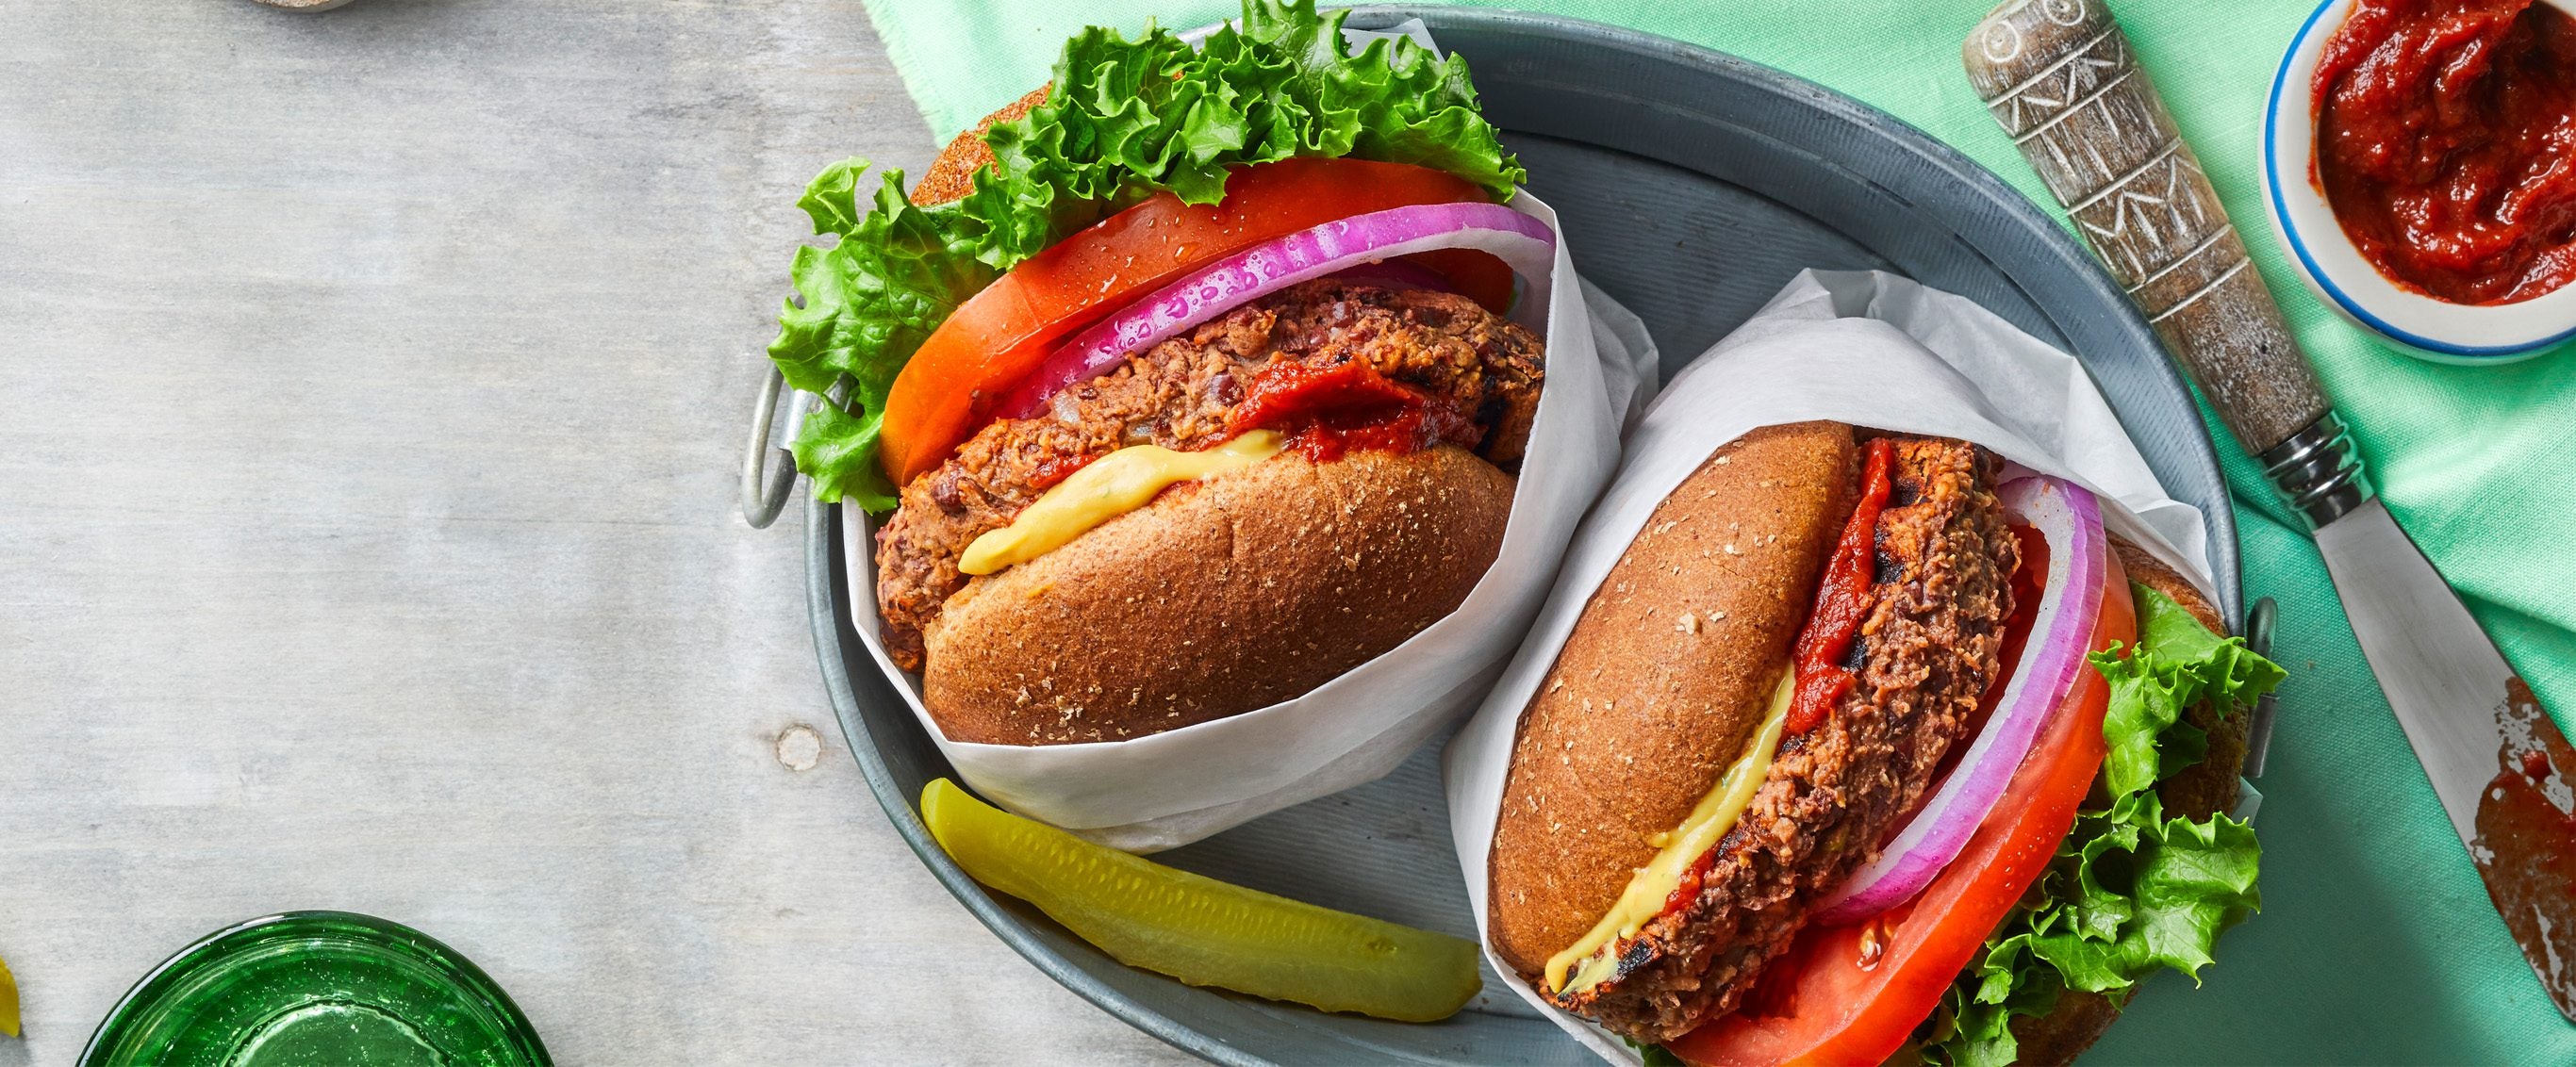 Two vegan five-ingredient veggie burgers with homemade patties and vegan cheese and slices of onion and tomato, shown from the side, in wrappers